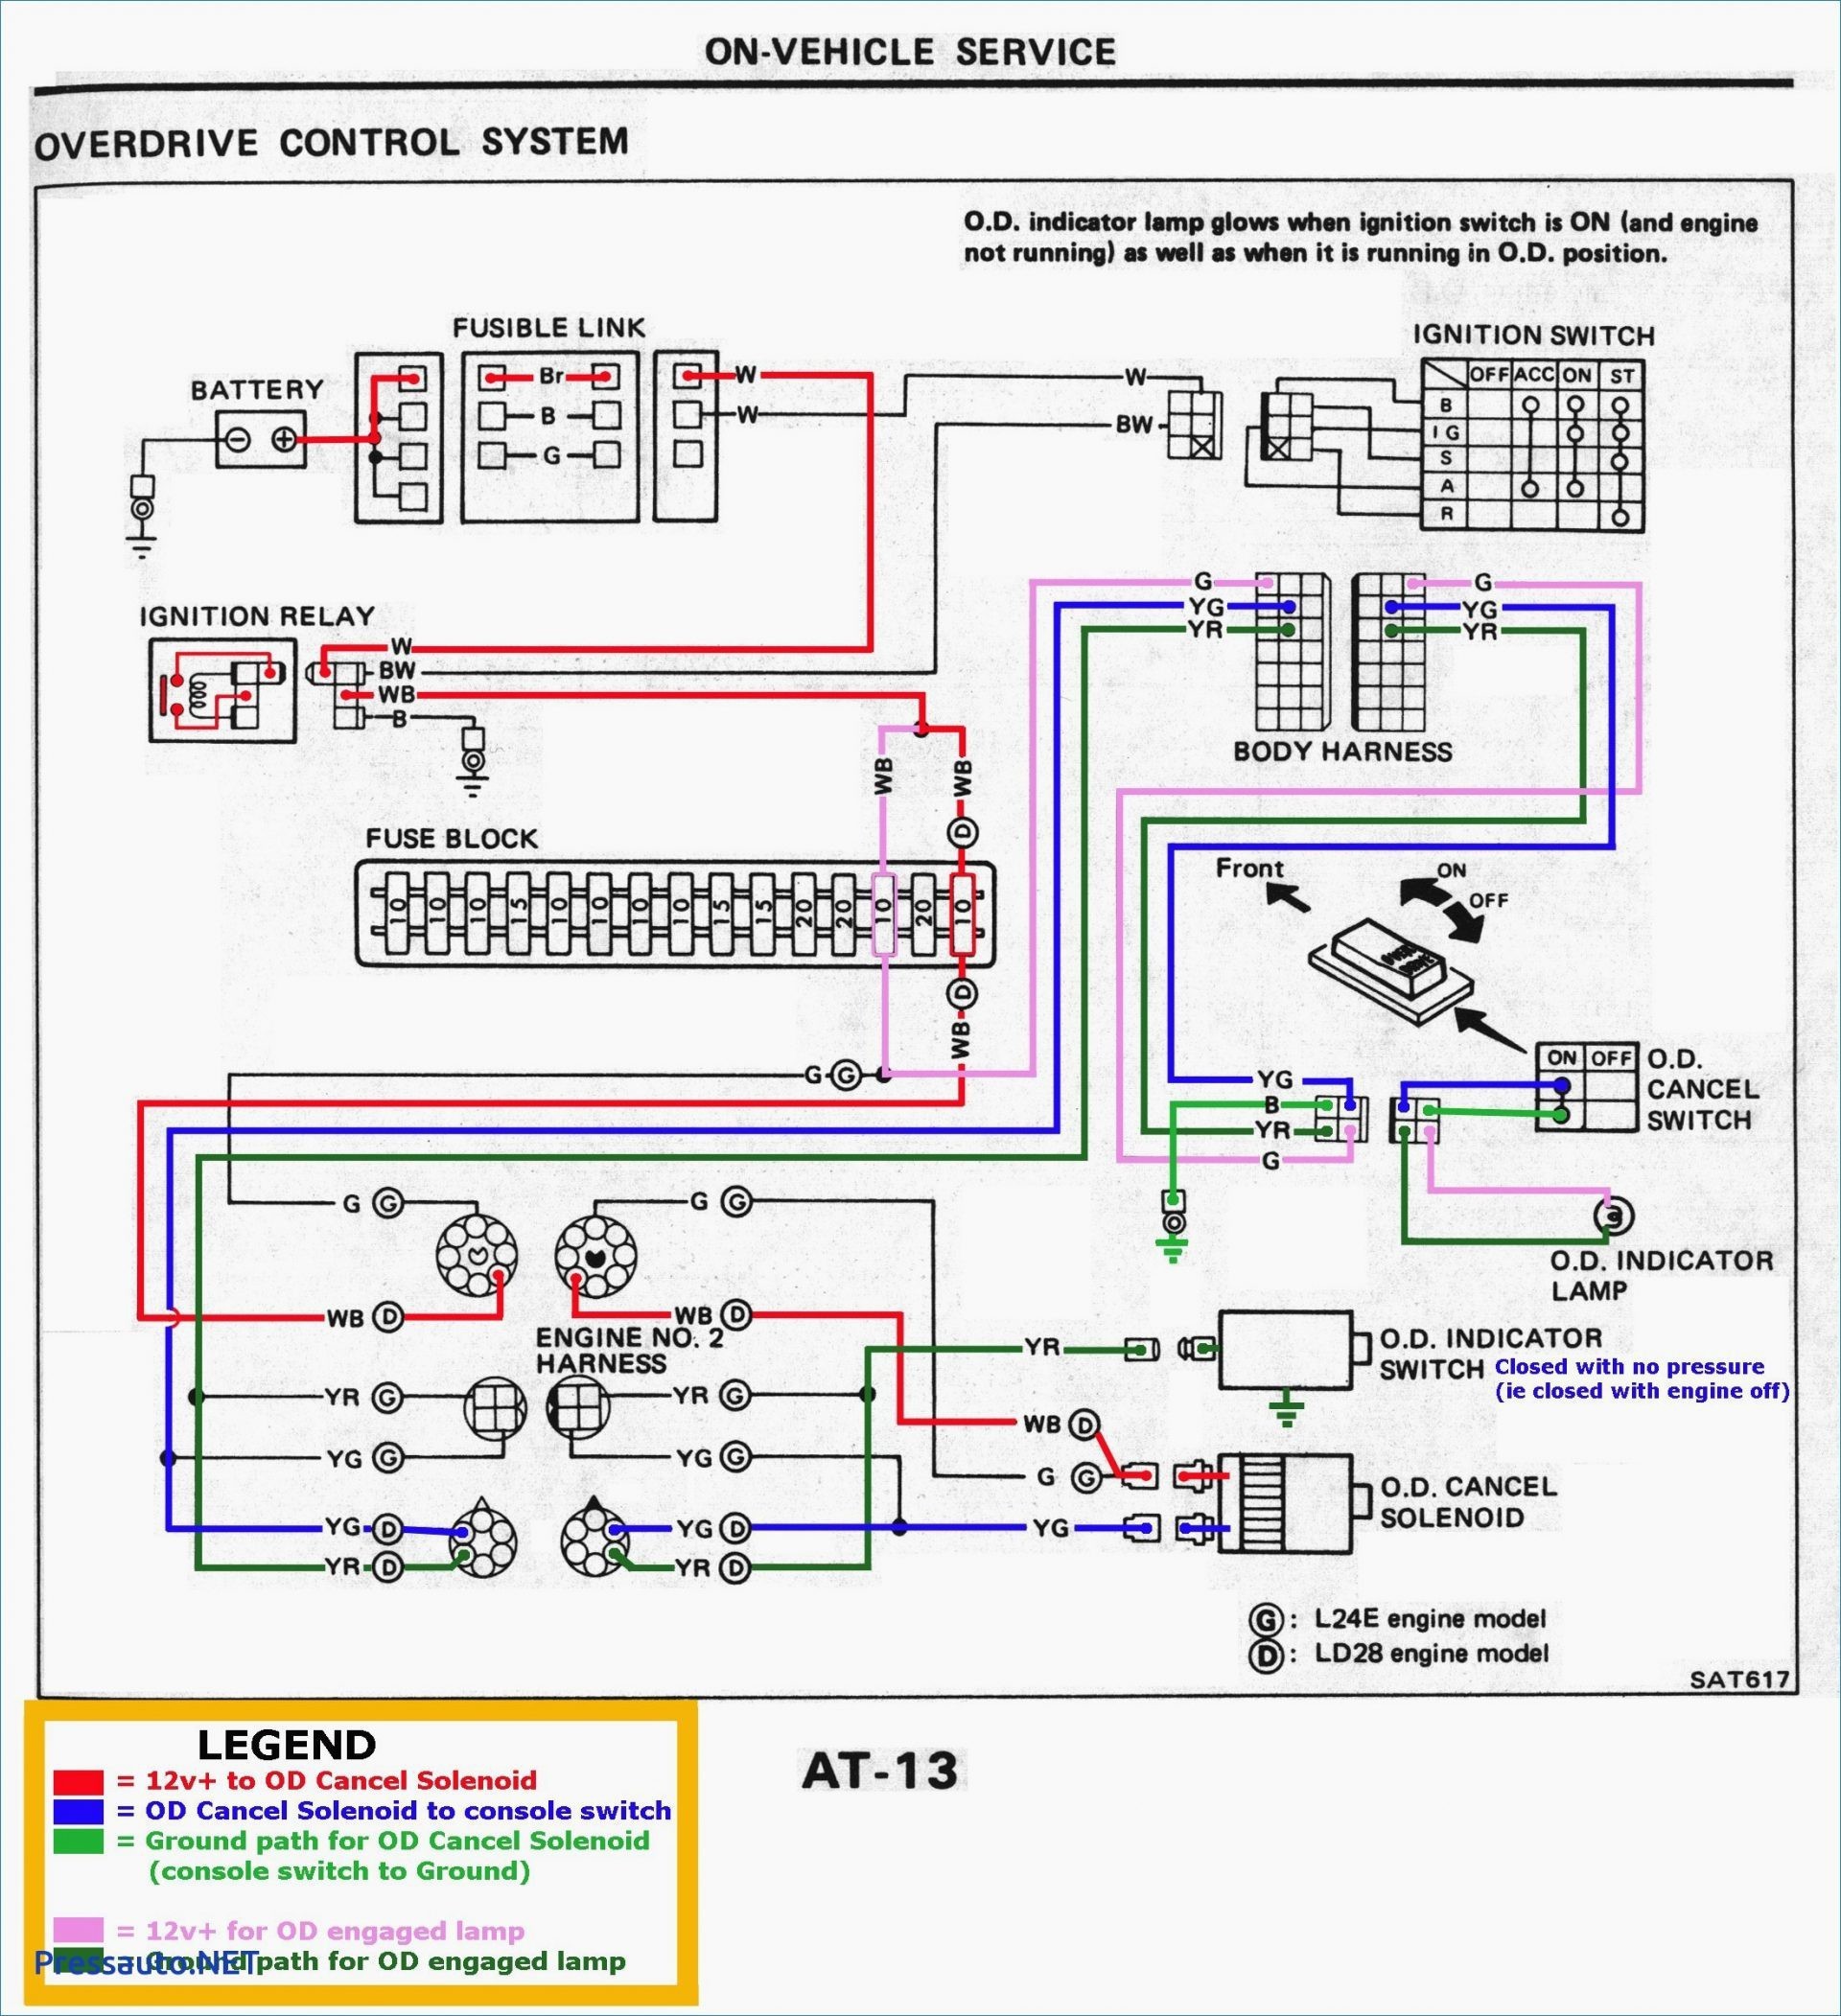 Wiring Diagram For 2 Lights And 1 Switch Simple 2019 Wiring Diagram For Lamp With Night Light